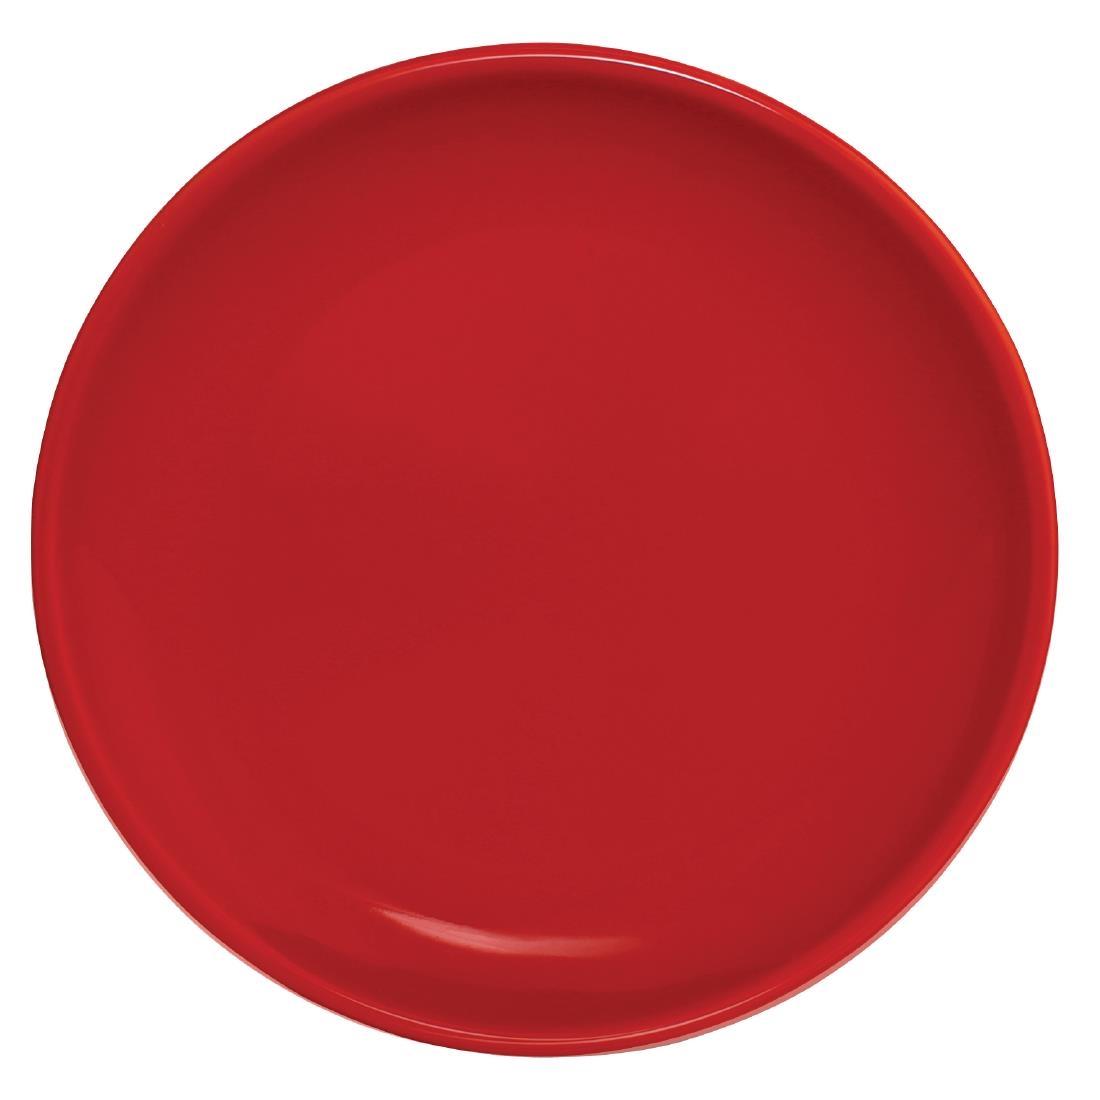 Olympia Cafe Coupe Plate Red 205mm (Pack of 12) - CG352  - 1